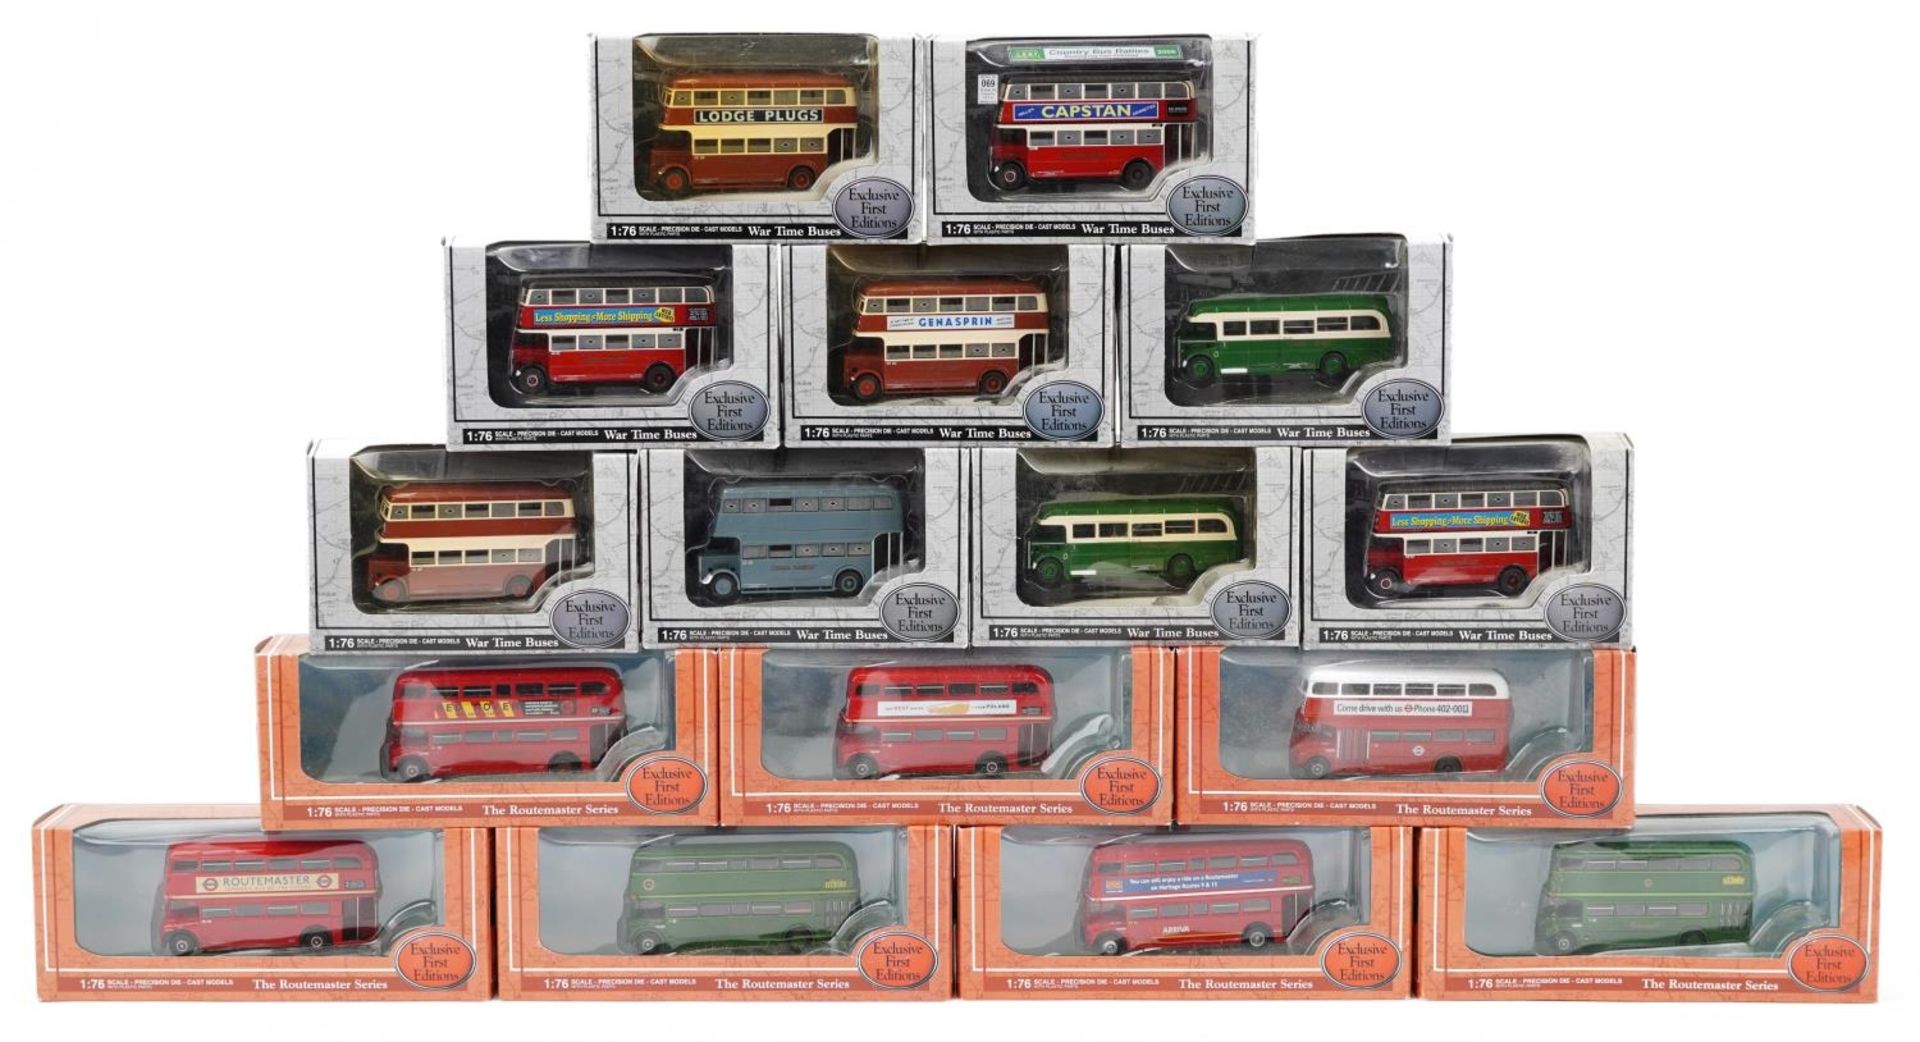 Sixteen Exclusive First Editions 1:76 scale diecast model buses with boxes from The Wartime Buses